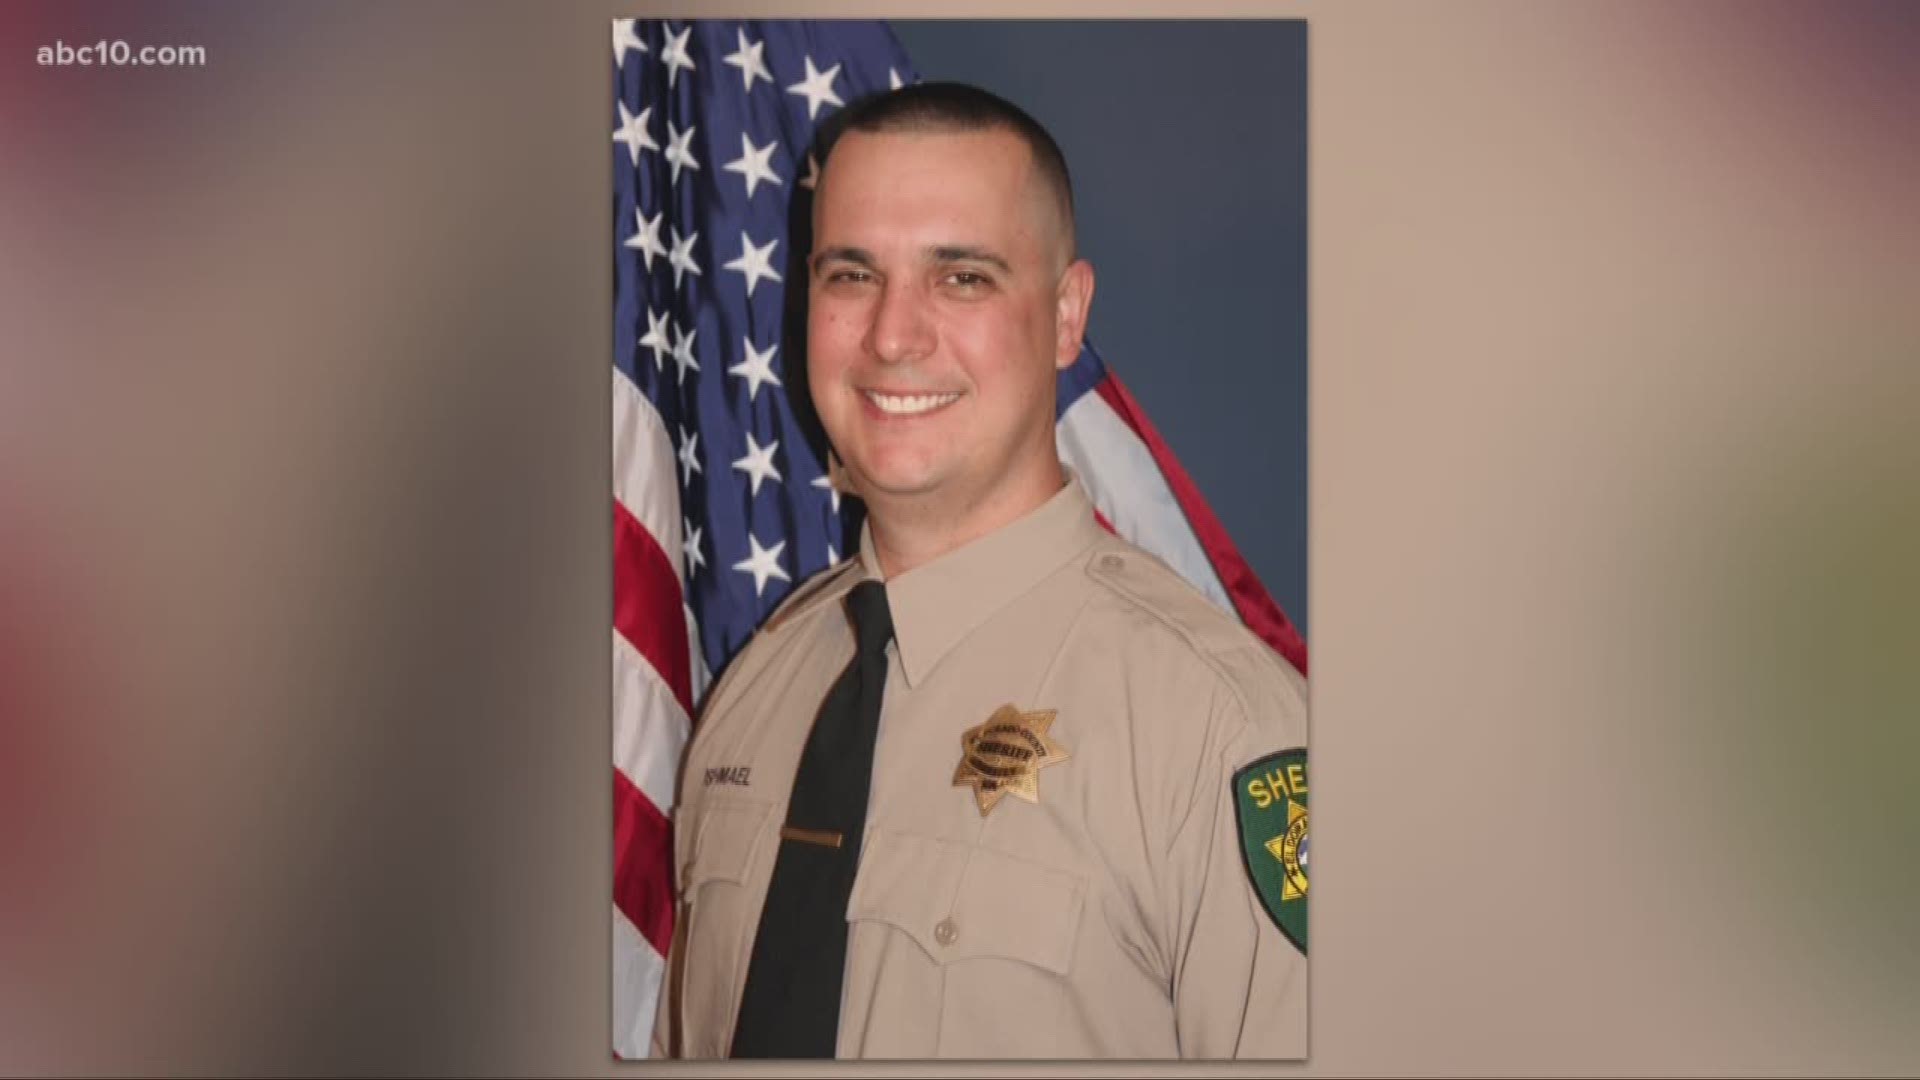 El Dorado County Sheriff's Deputy Brian Ishmael was shot and killed while responding to a call in Somerset, south of Placerville.